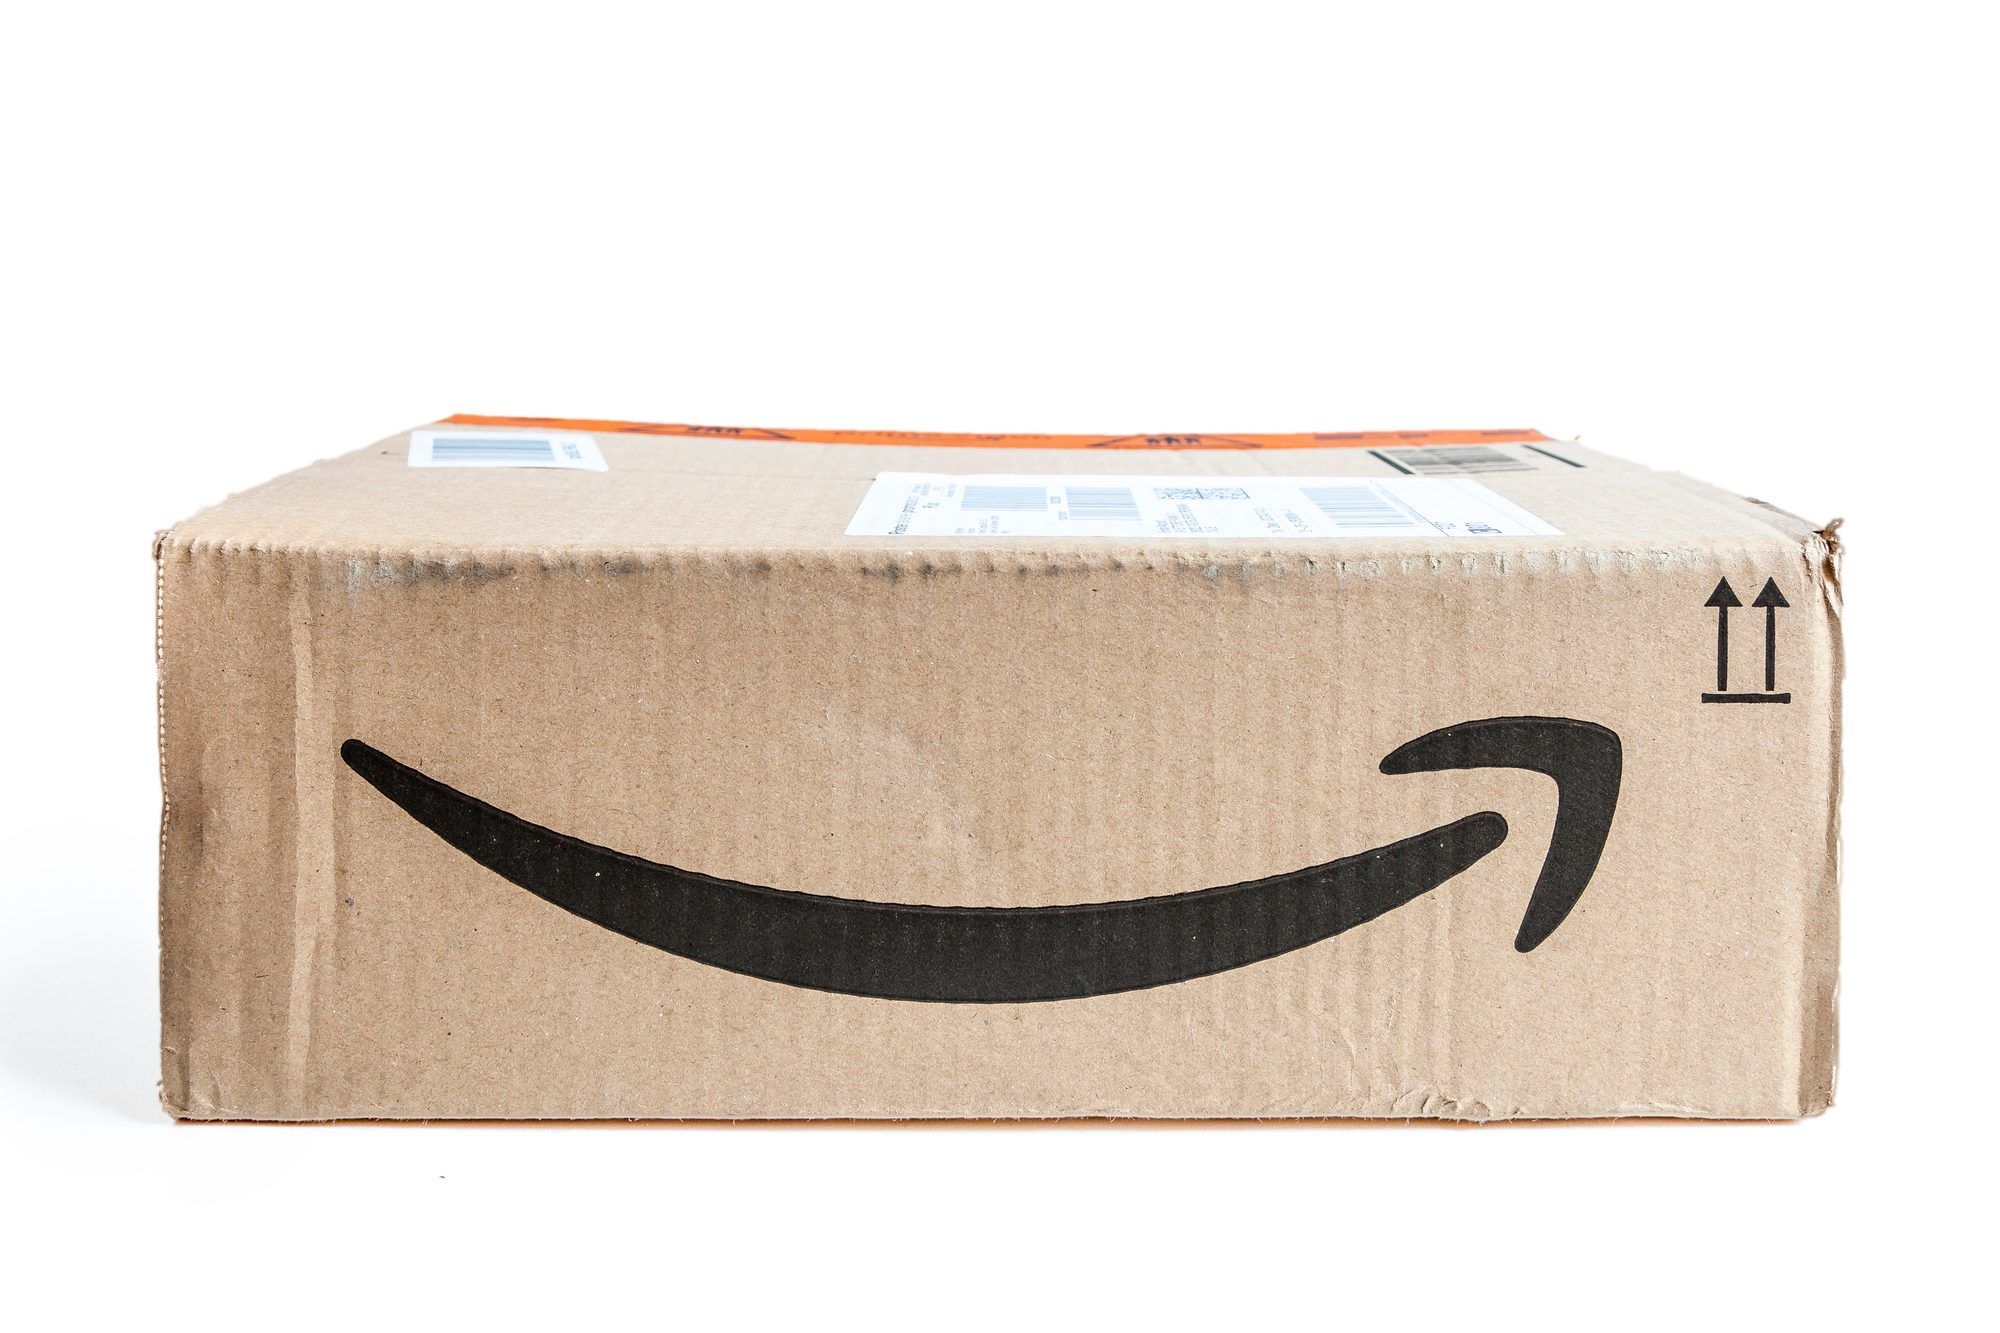 Amazon files lawsuit over COVID-19 protection criticism